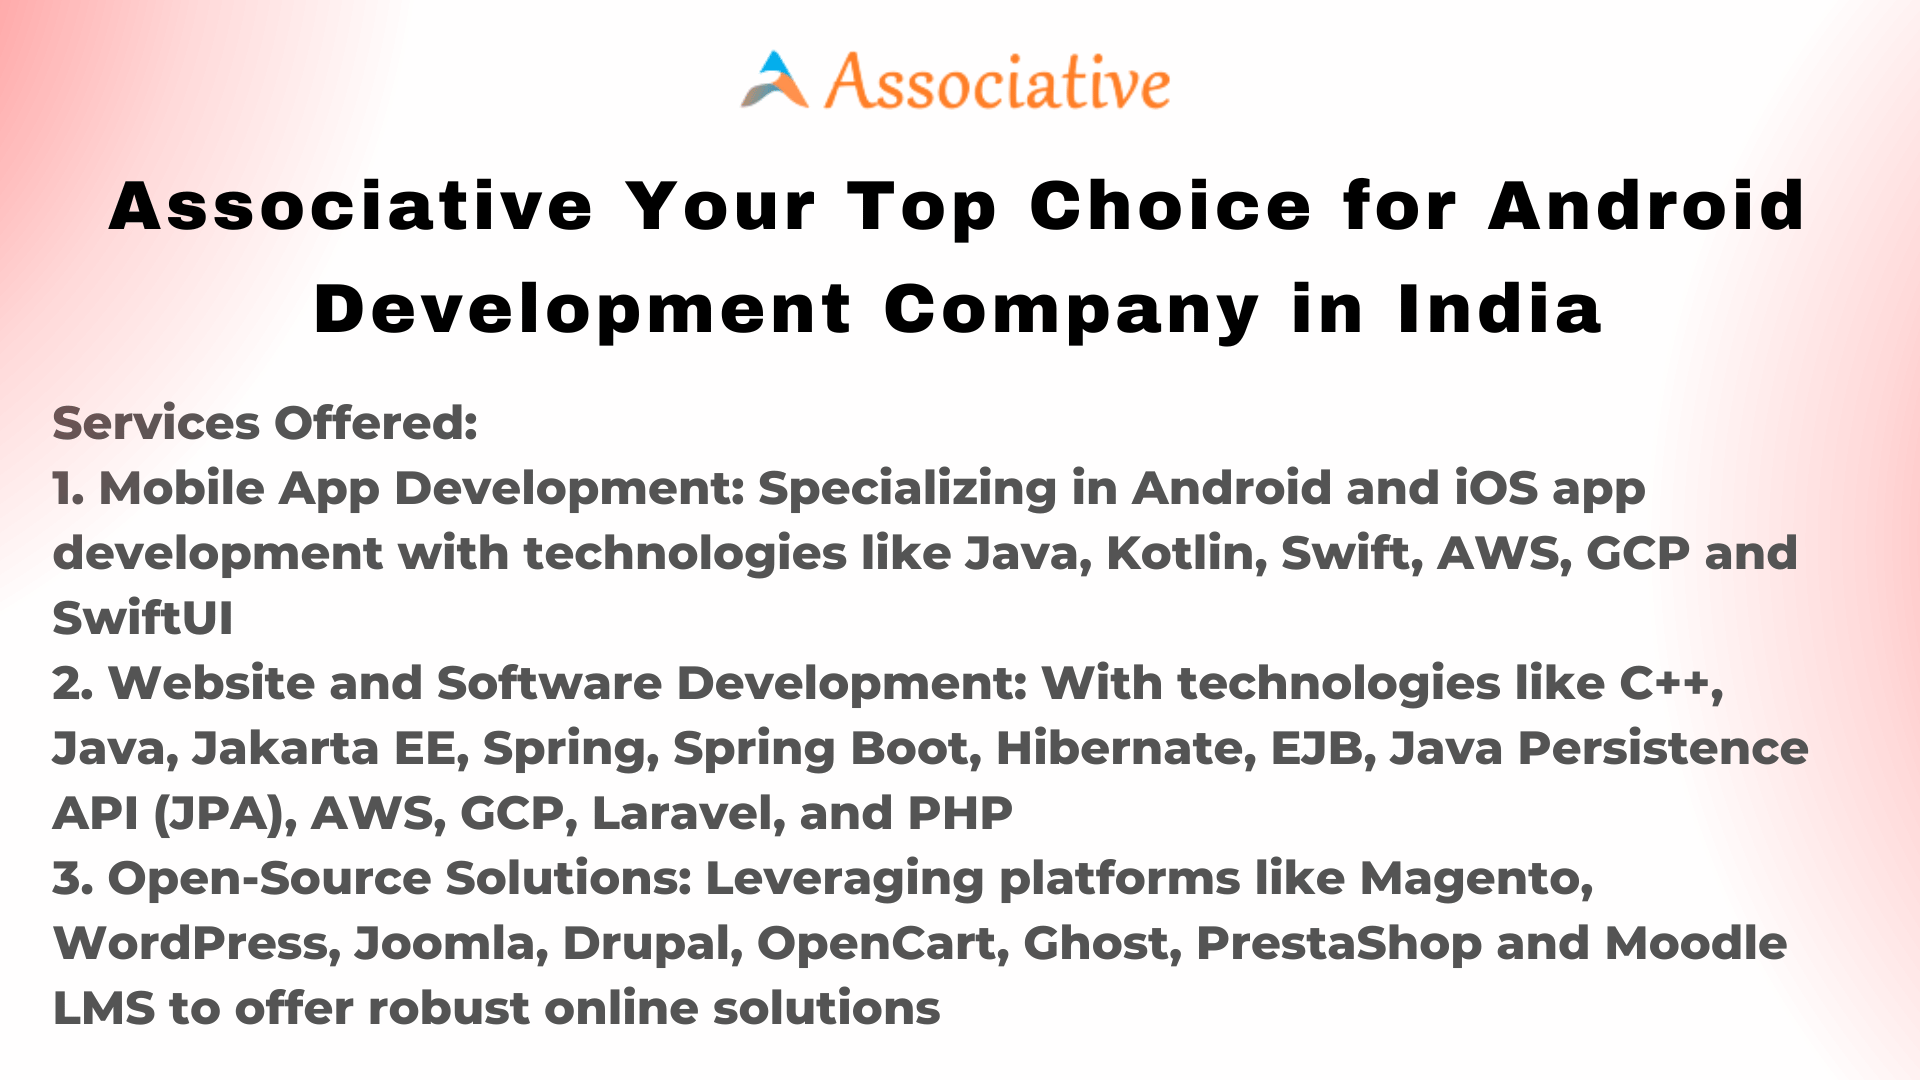 Associative Your Top Choice for Android Development Company in India